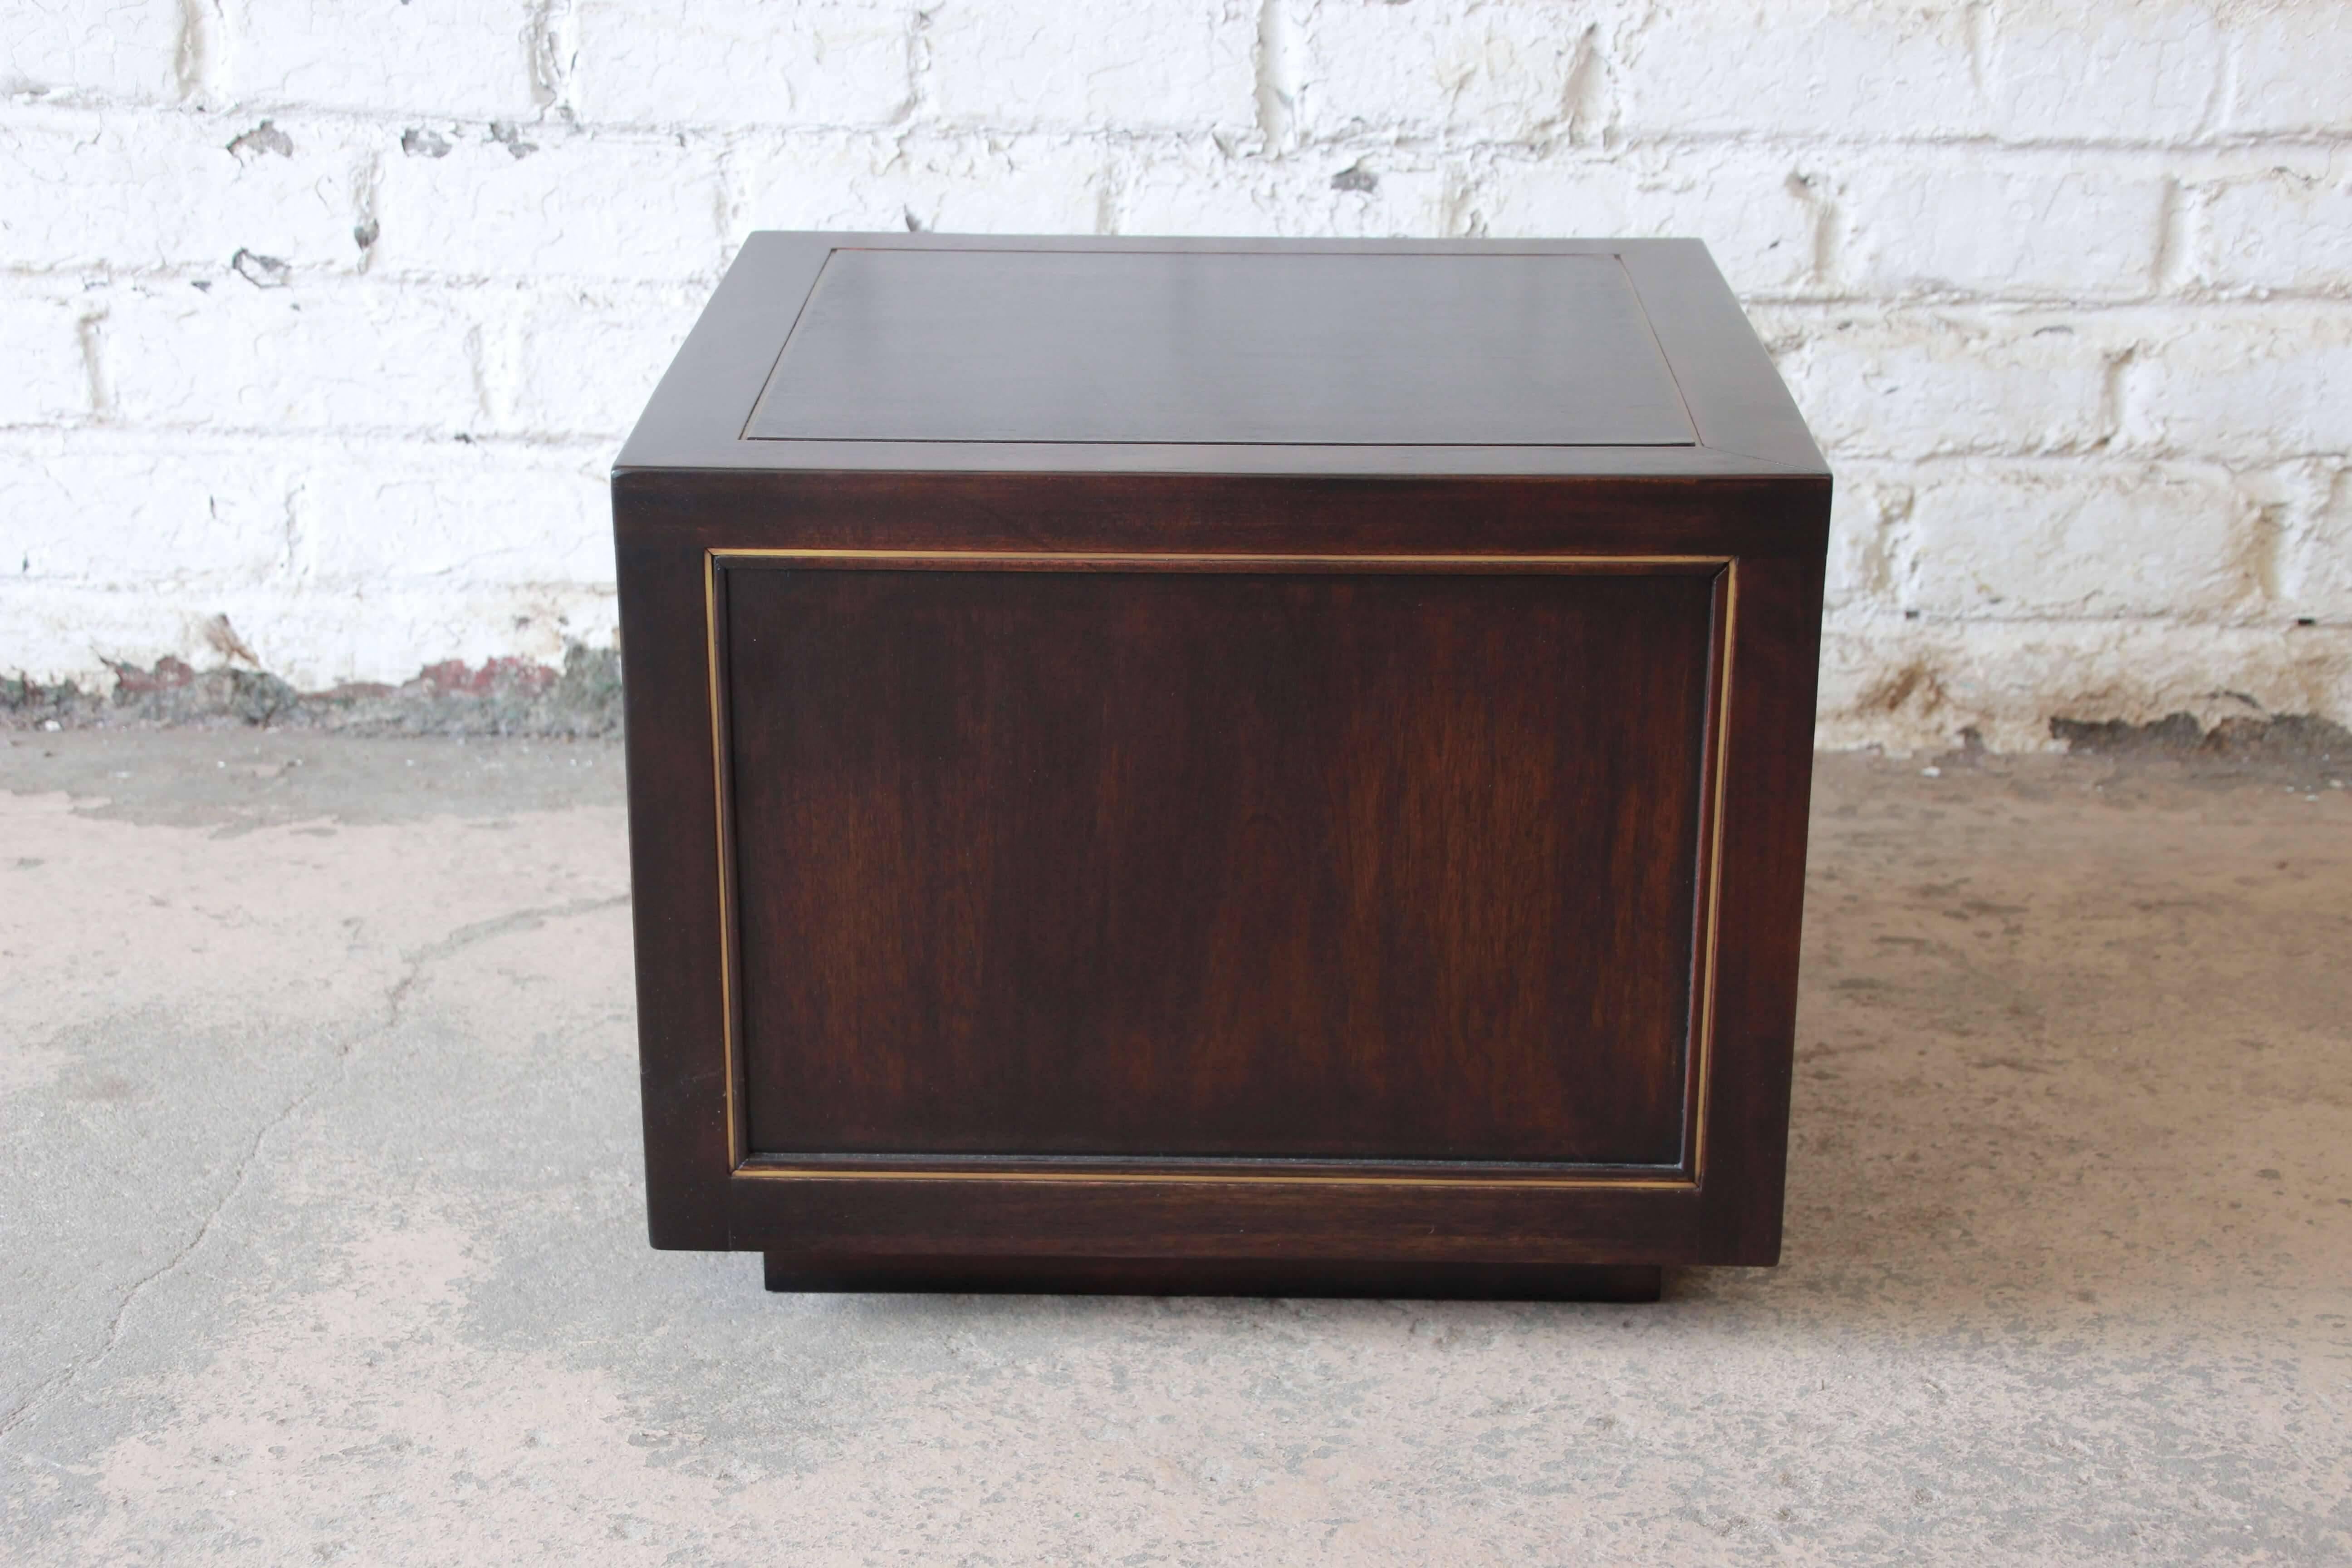 Offering a beautifully restored cube side table by Edward Wormley for Dunbar. The cube features inlaid brass with a sleek onyx finish.